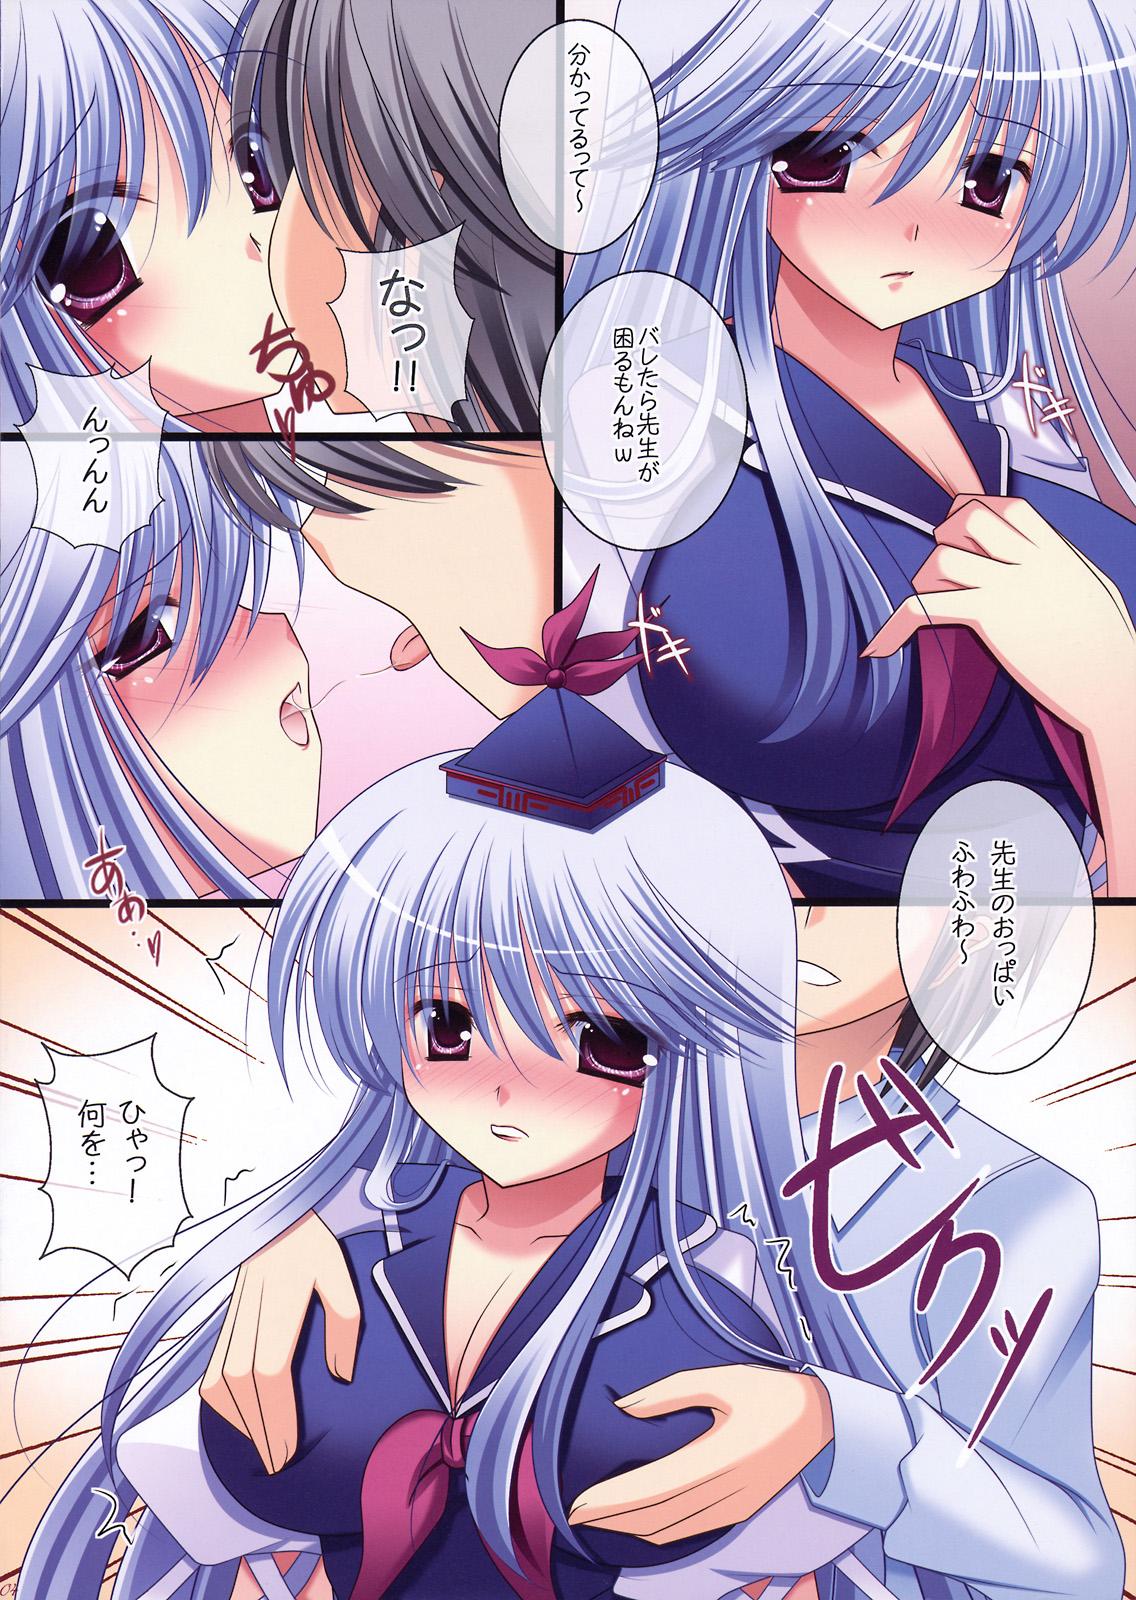 Sloppy Blowjob Meaning of Love - Touhou project Asslicking - Page 4